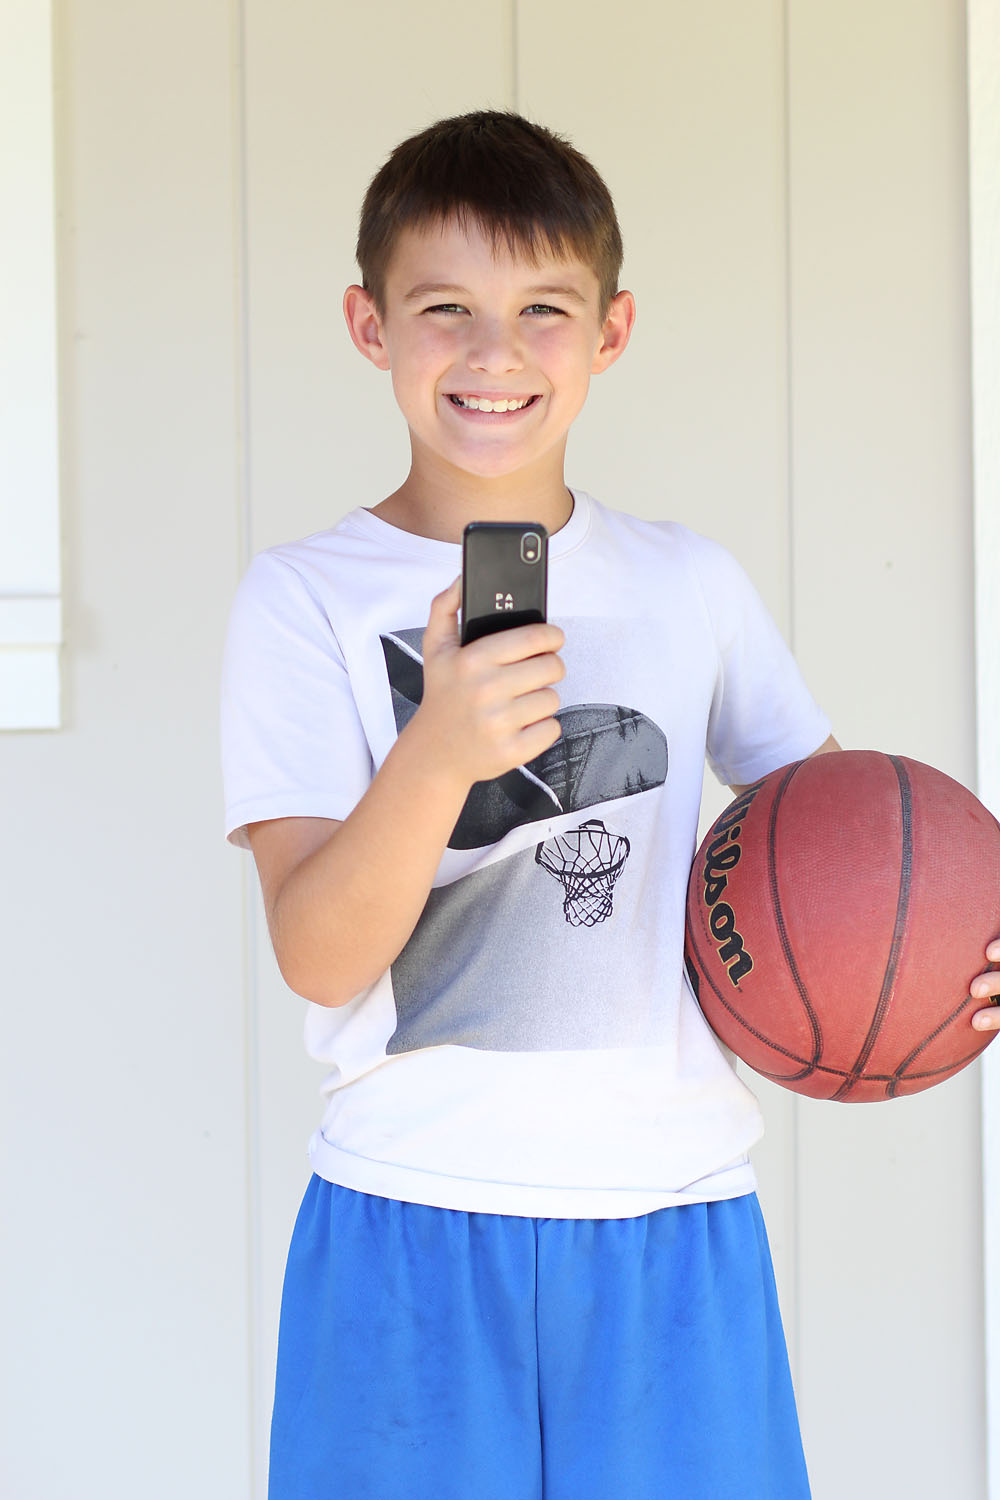 The Coolest Introductory Cell Phone for Kids - Palm Phone